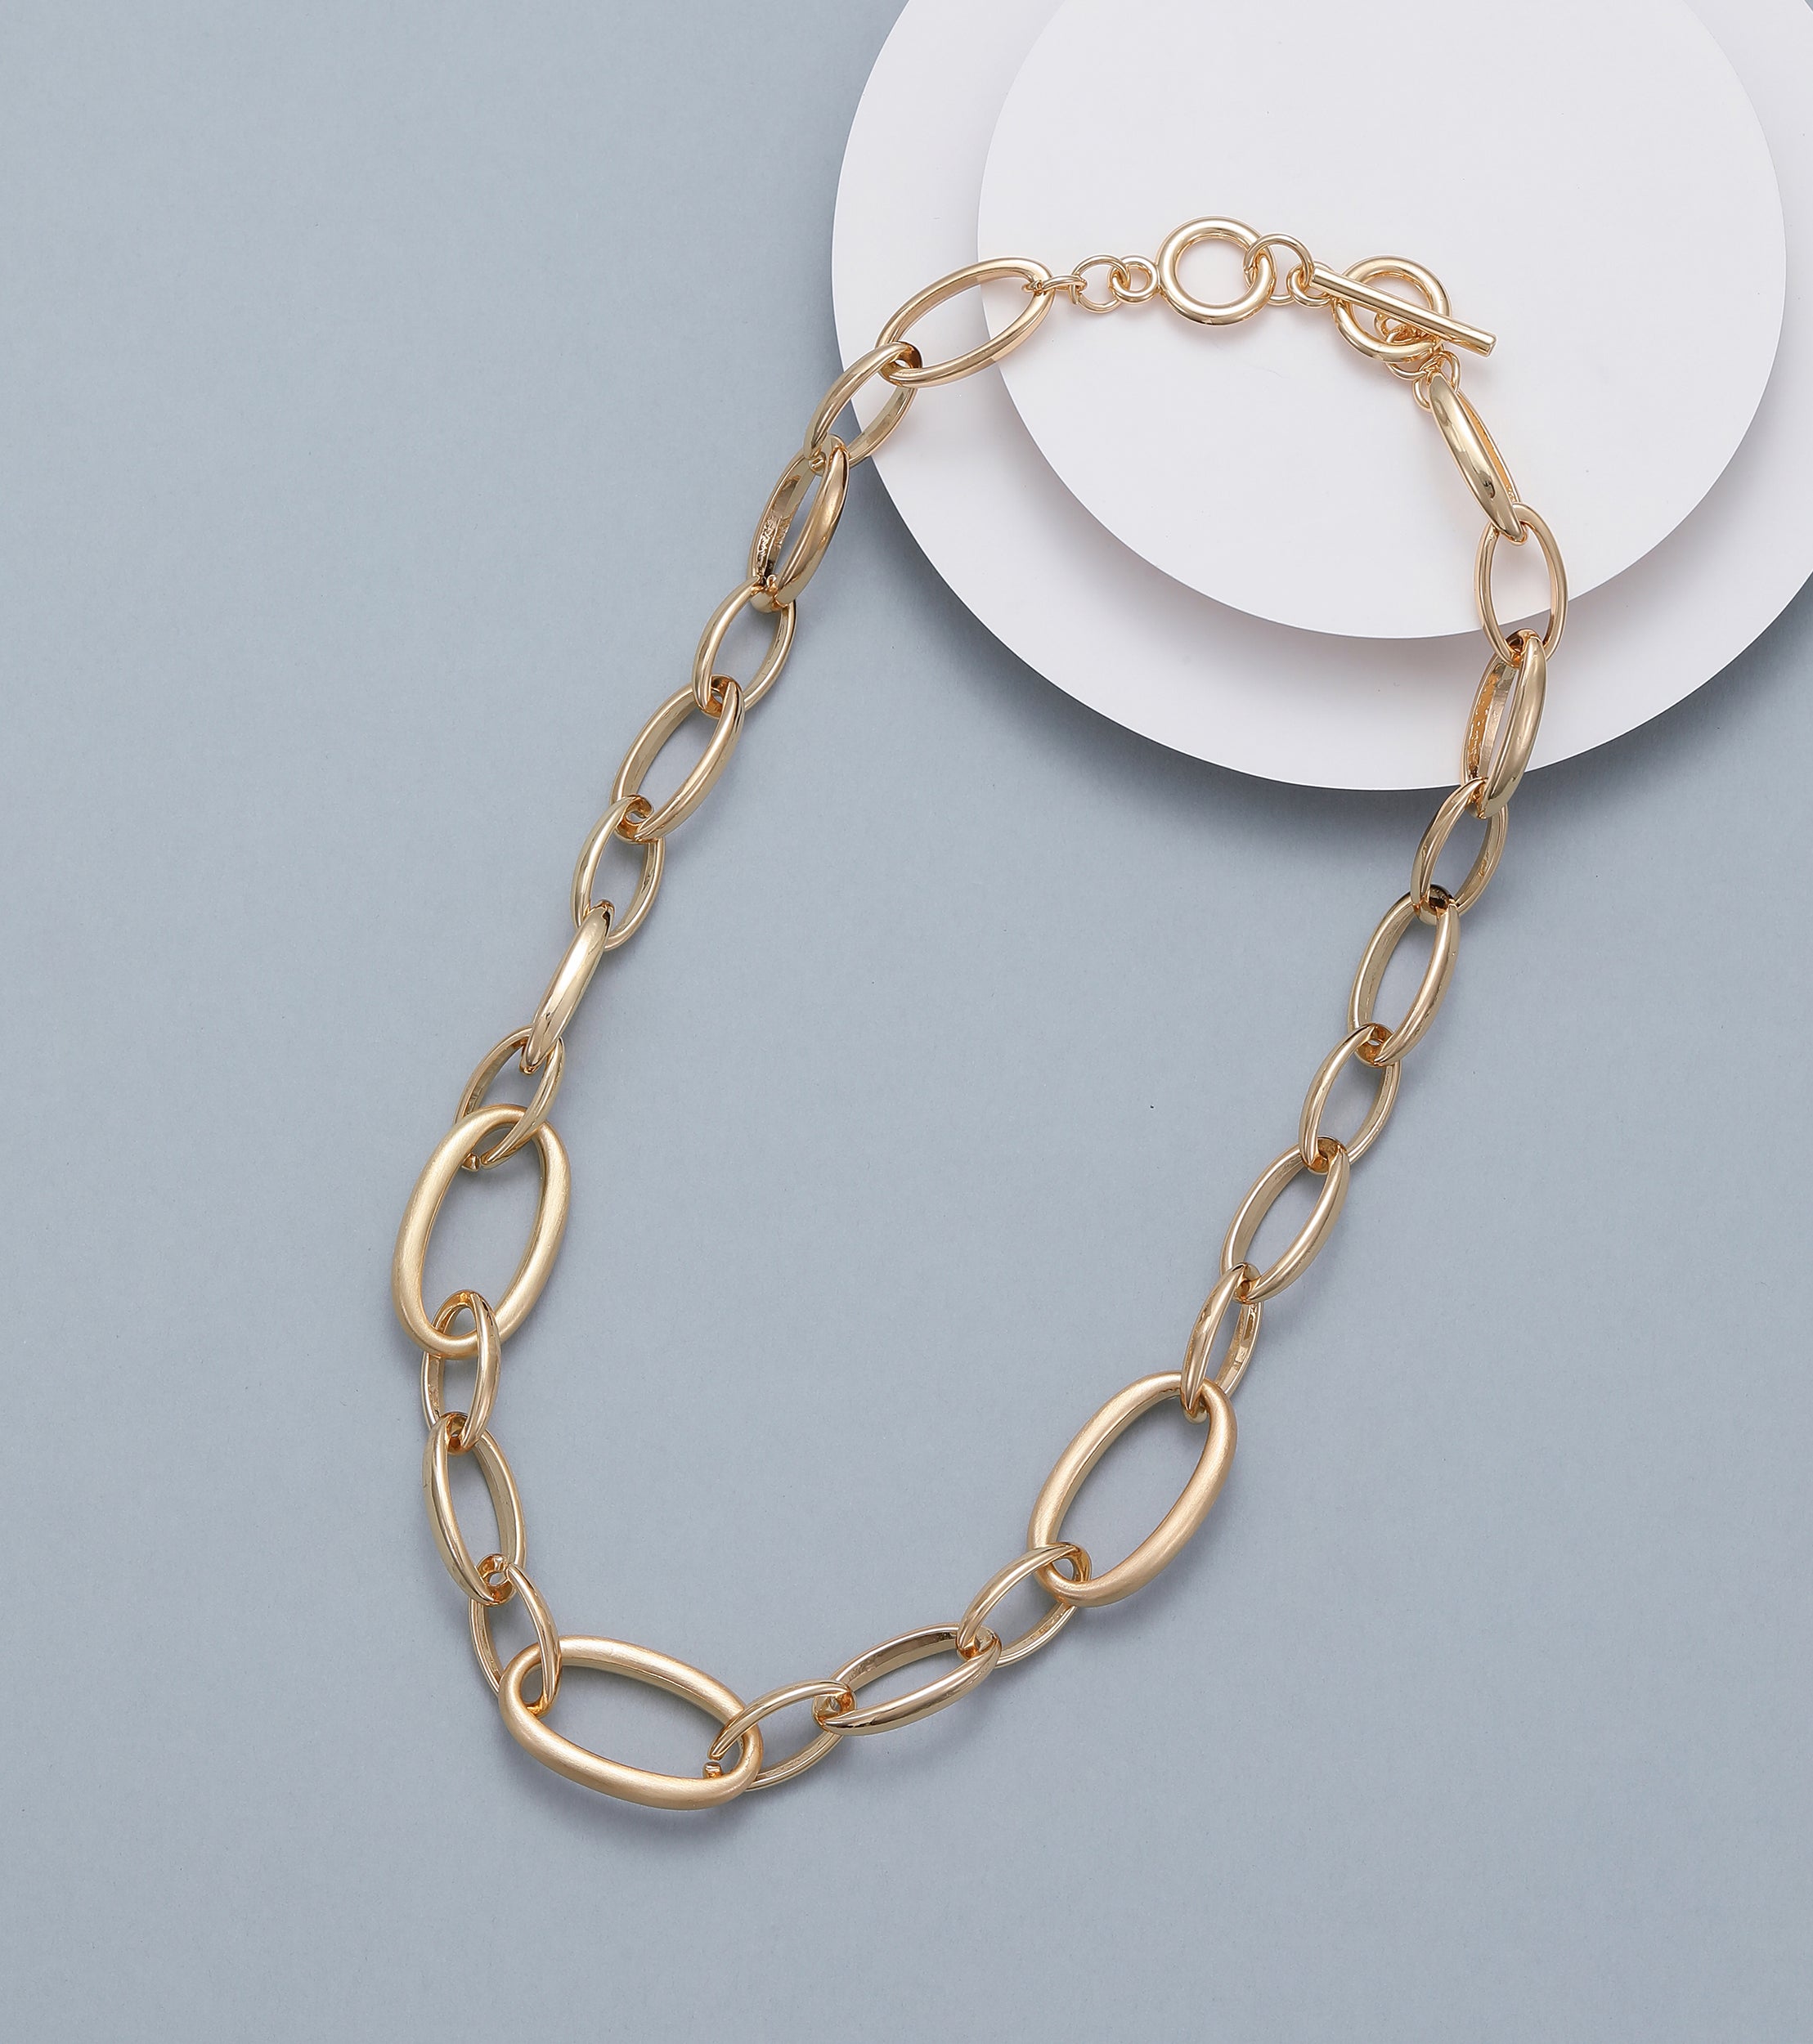 Short necklace with yellow gold interlinks